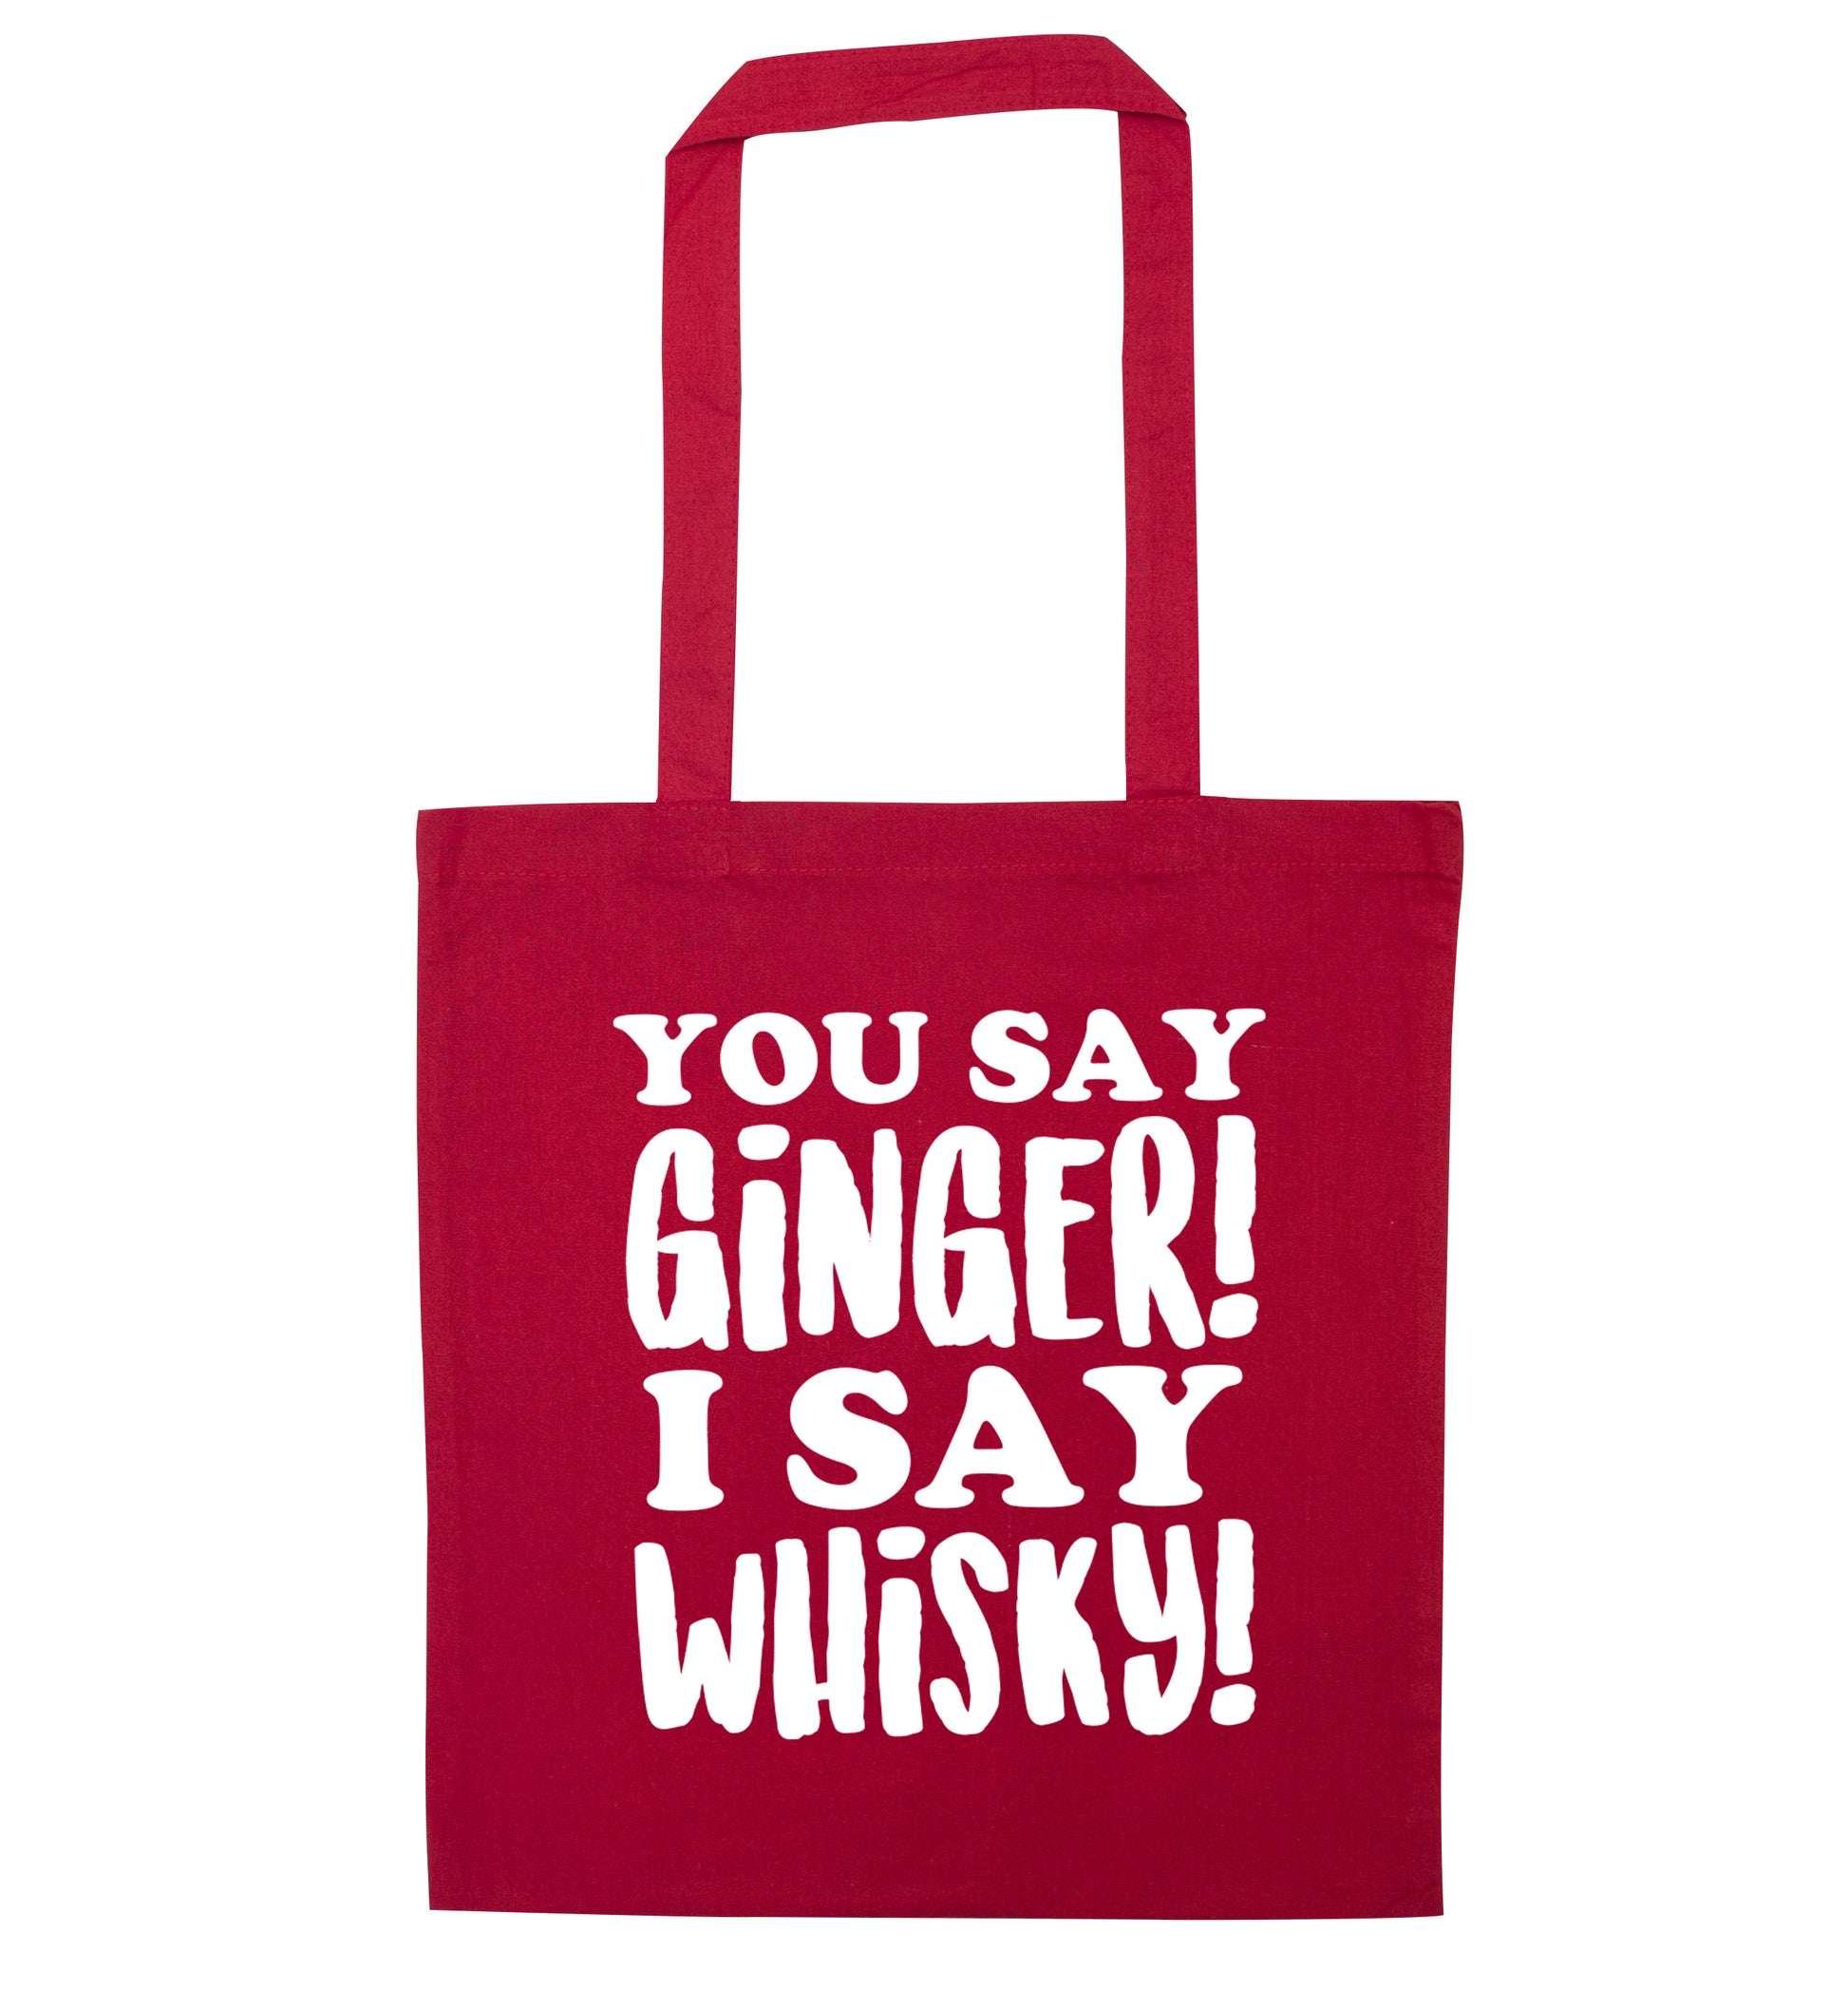 You say ginger I say whisky! red tote bag